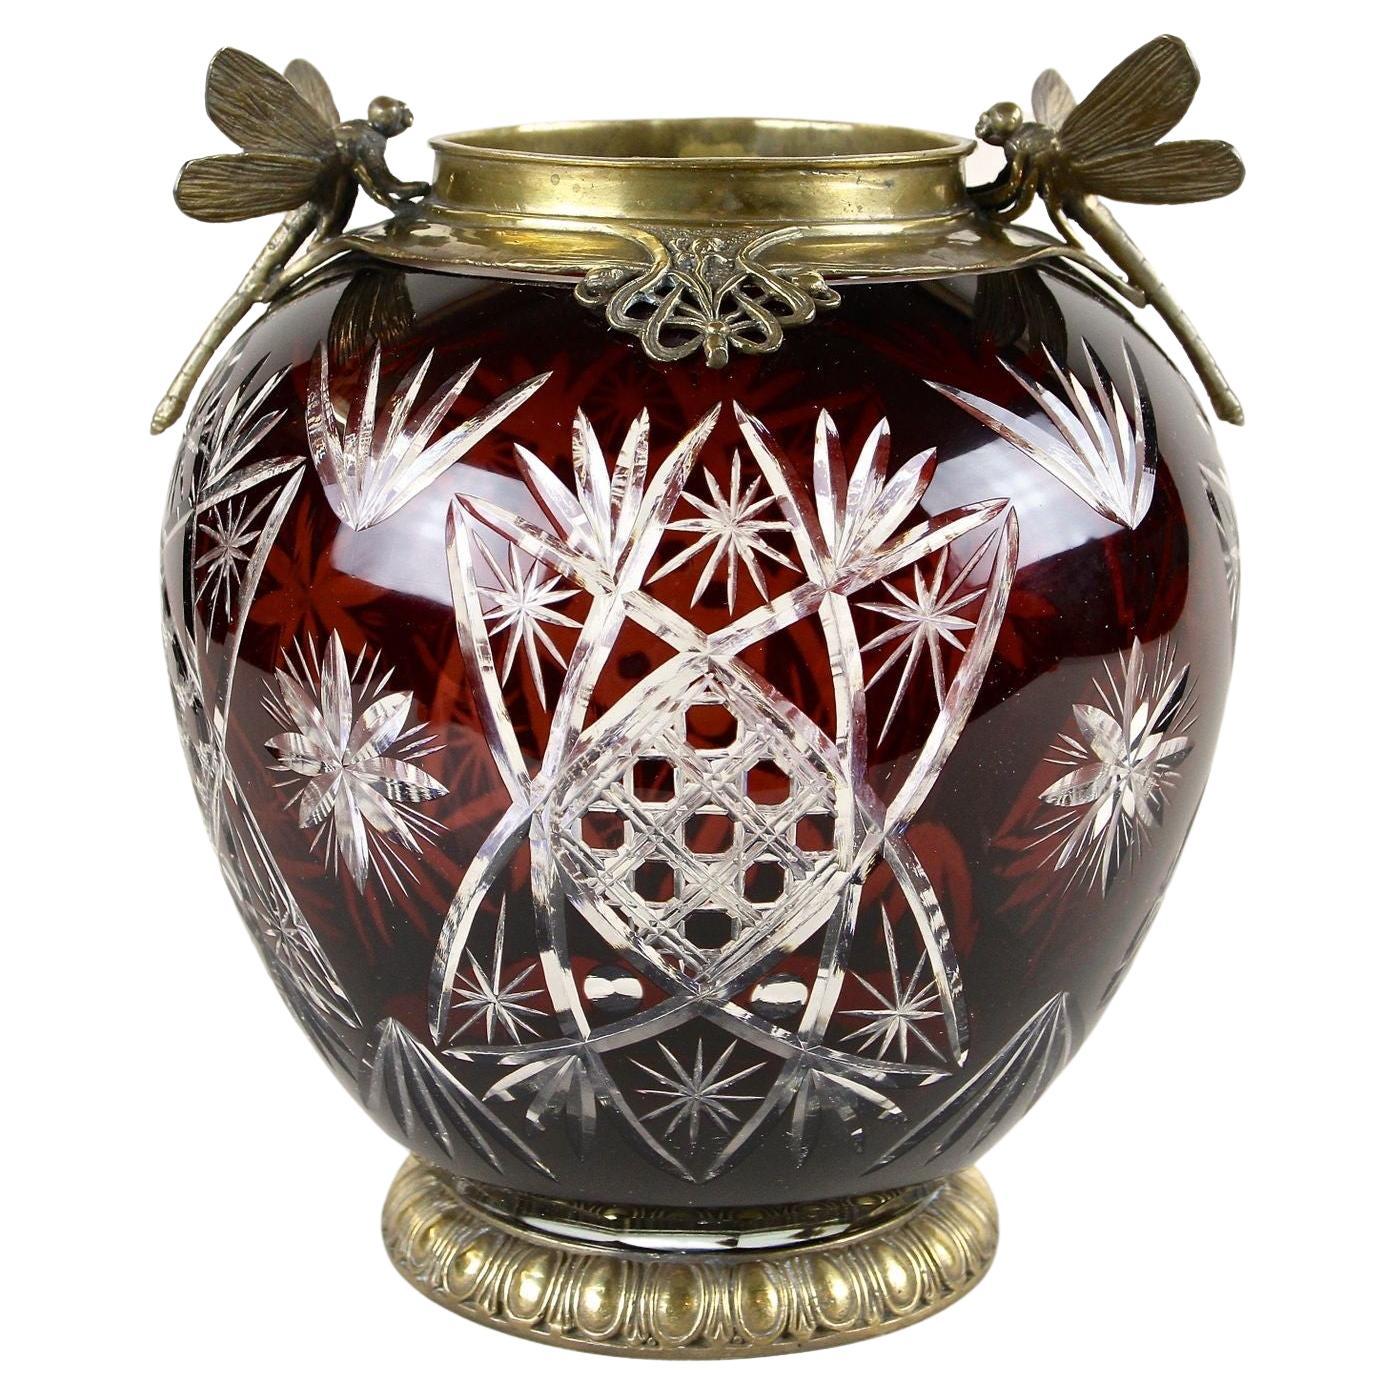 Exceptional, rare pair of 20th Century Cut Glass Vases with bronze mountings from the early Art Nouveau period in France around 1900. This outstanding pieces of French glass art impress with gorgeous, spherical shaped dark red bodies with amazing